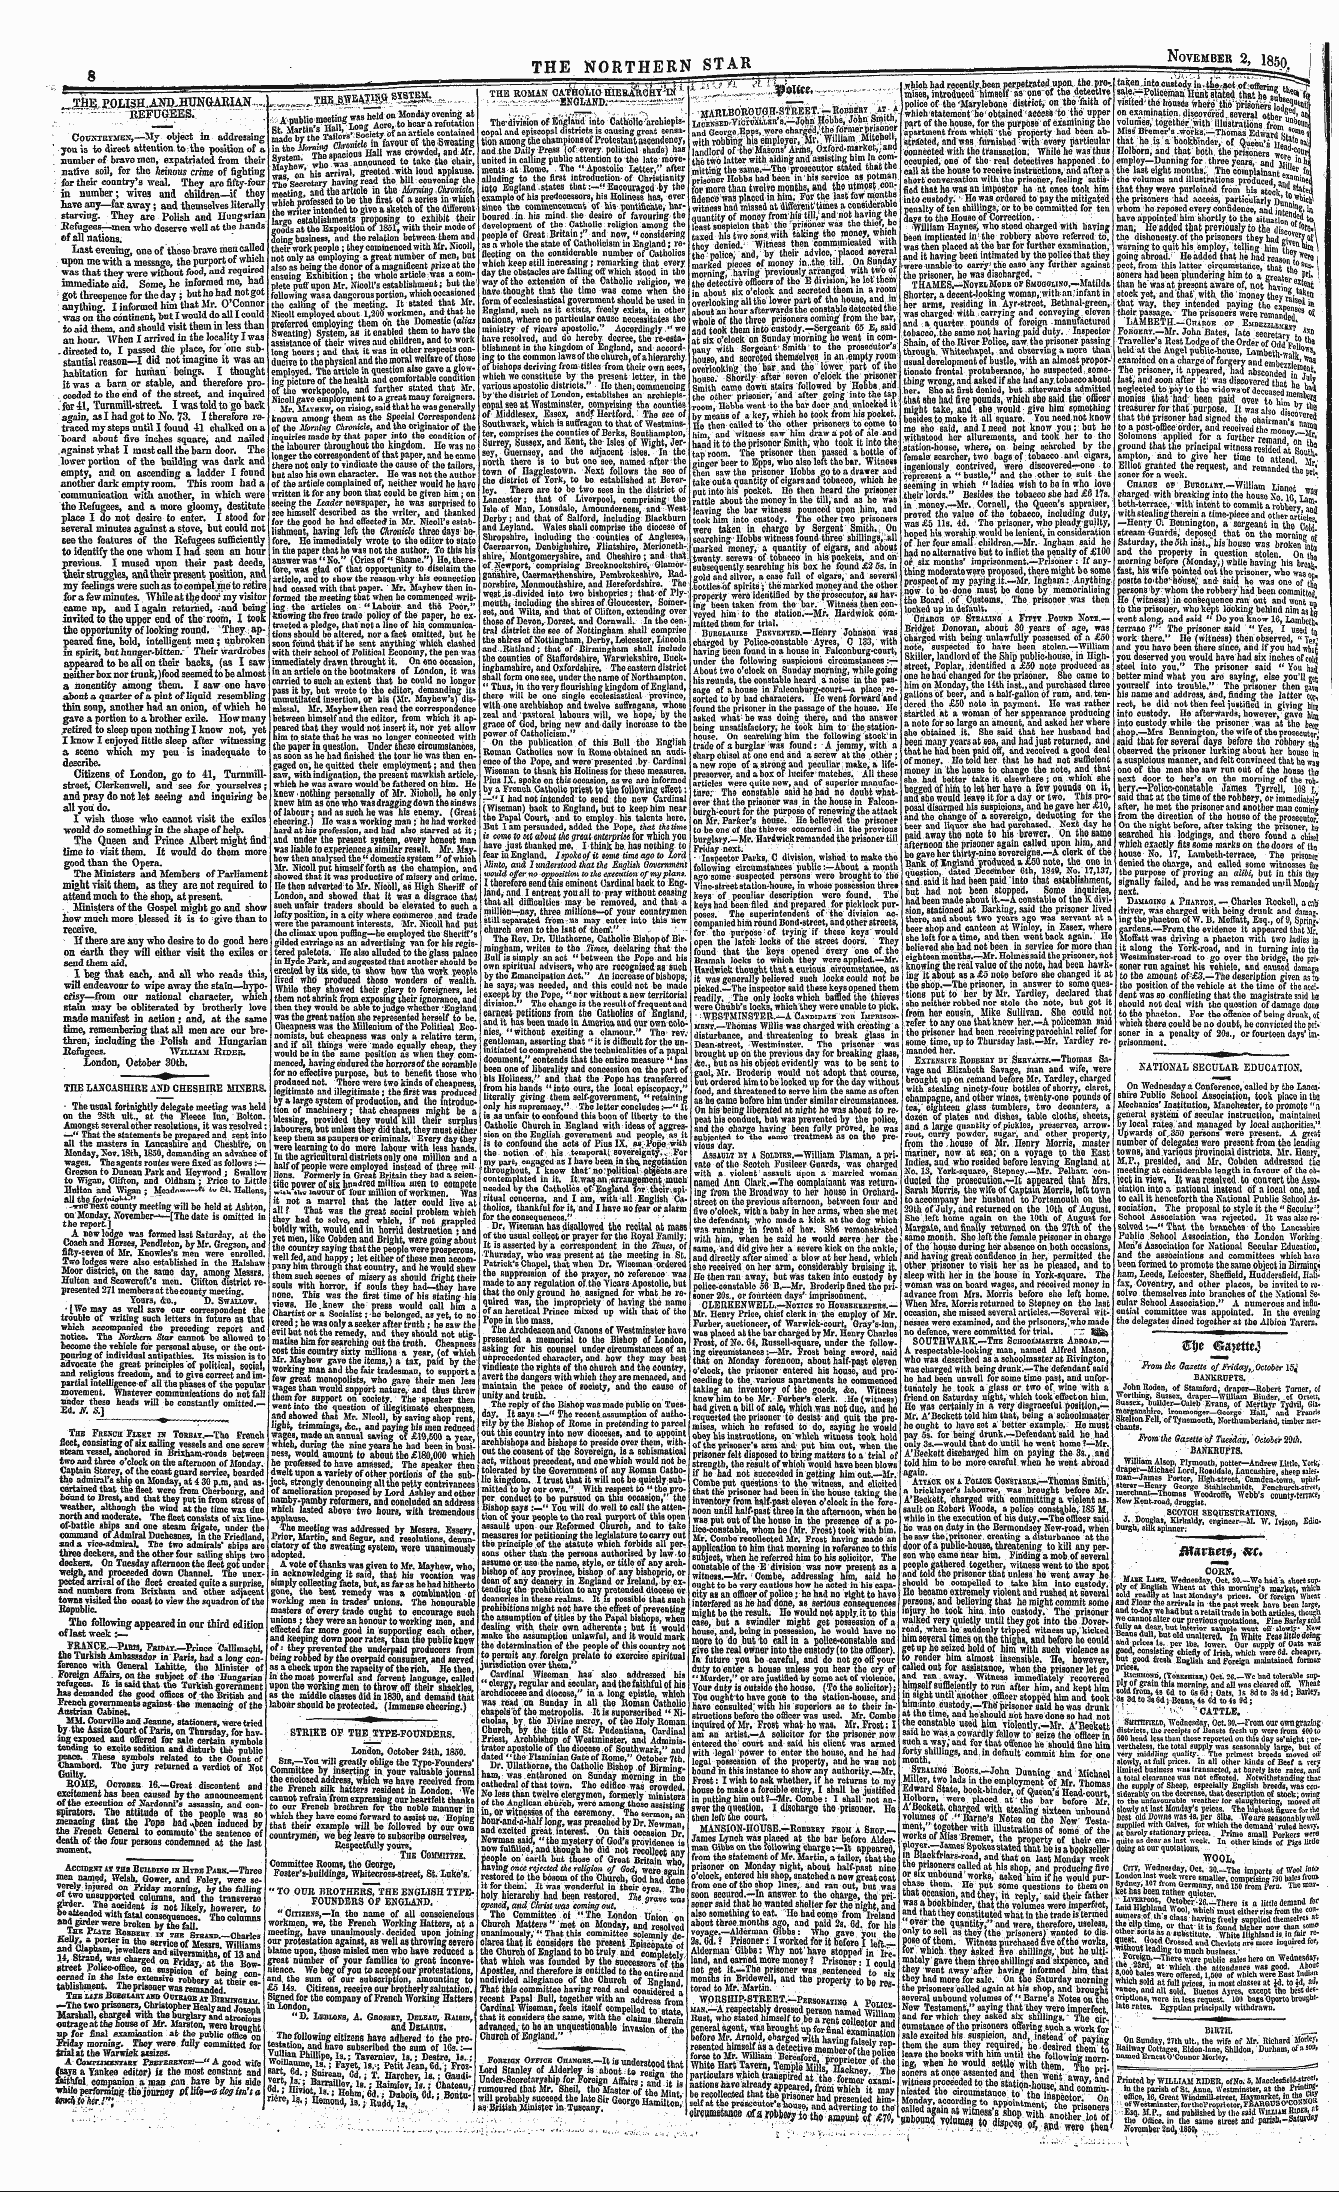 Northern Star (1837-1852): jS F Y, 2nd edition - From The Gazette Of Friday, .October 15,...